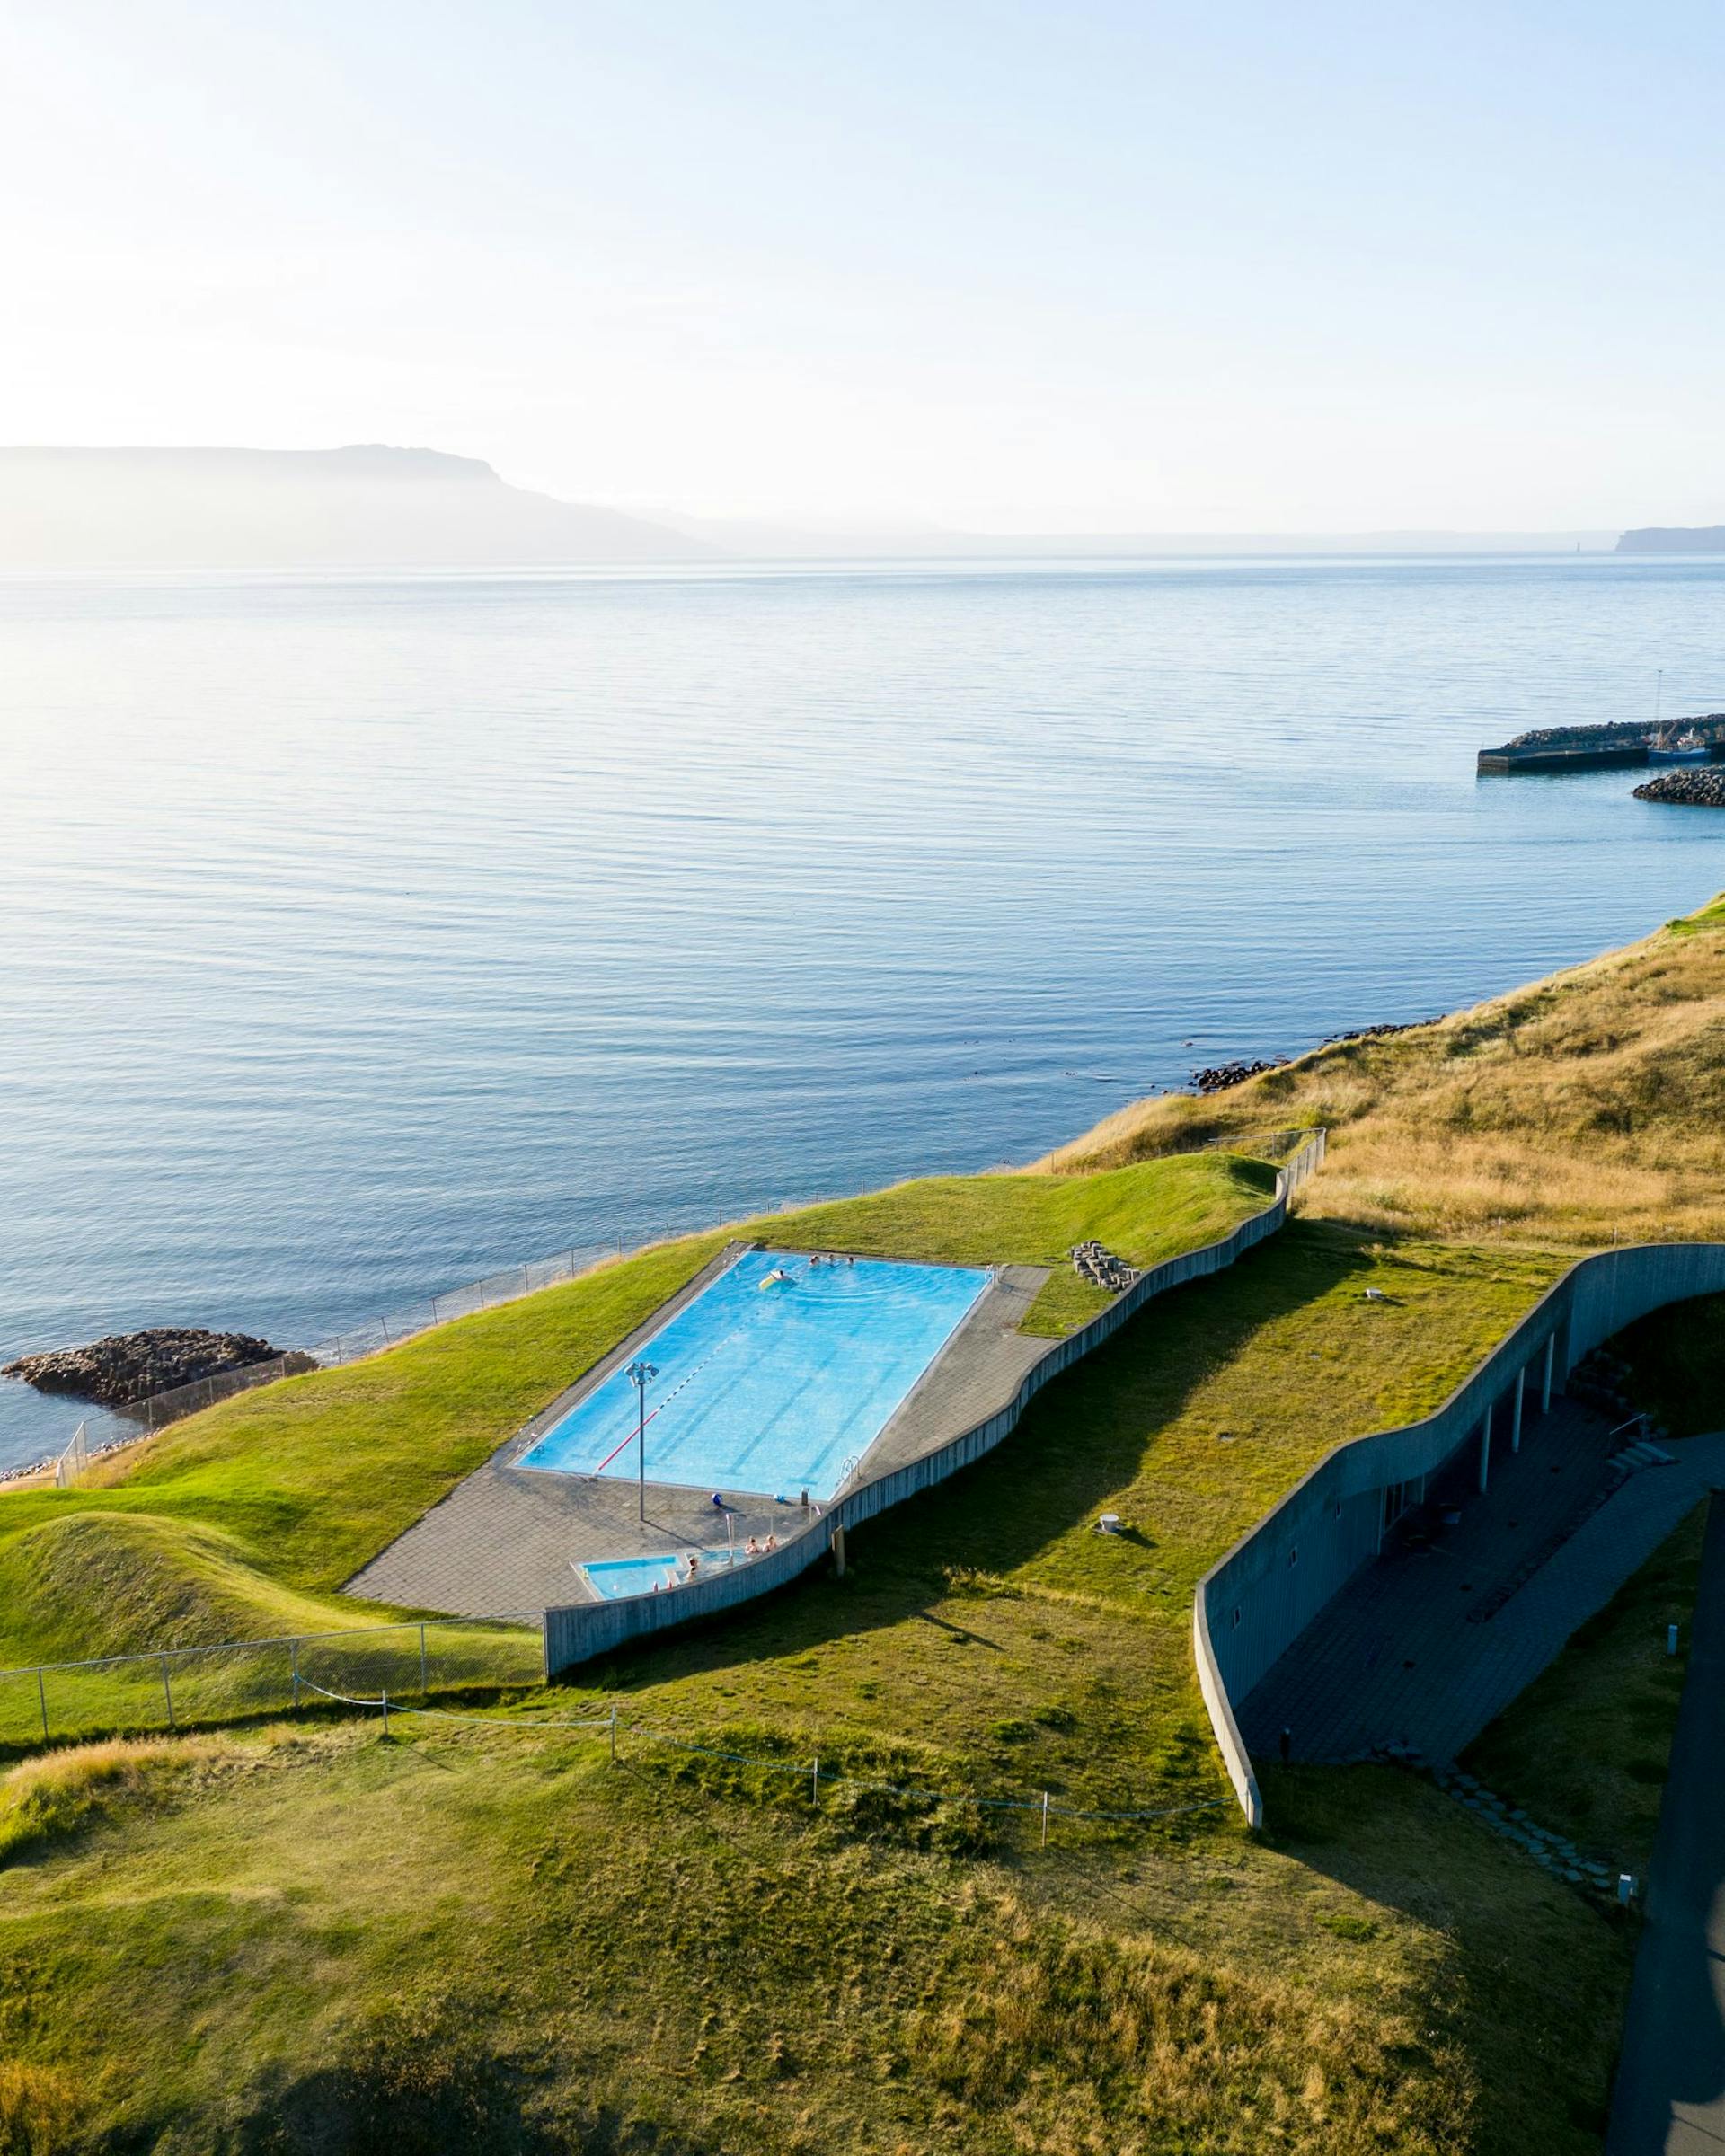 A swimming pool by the ocean overlooking the Fjord